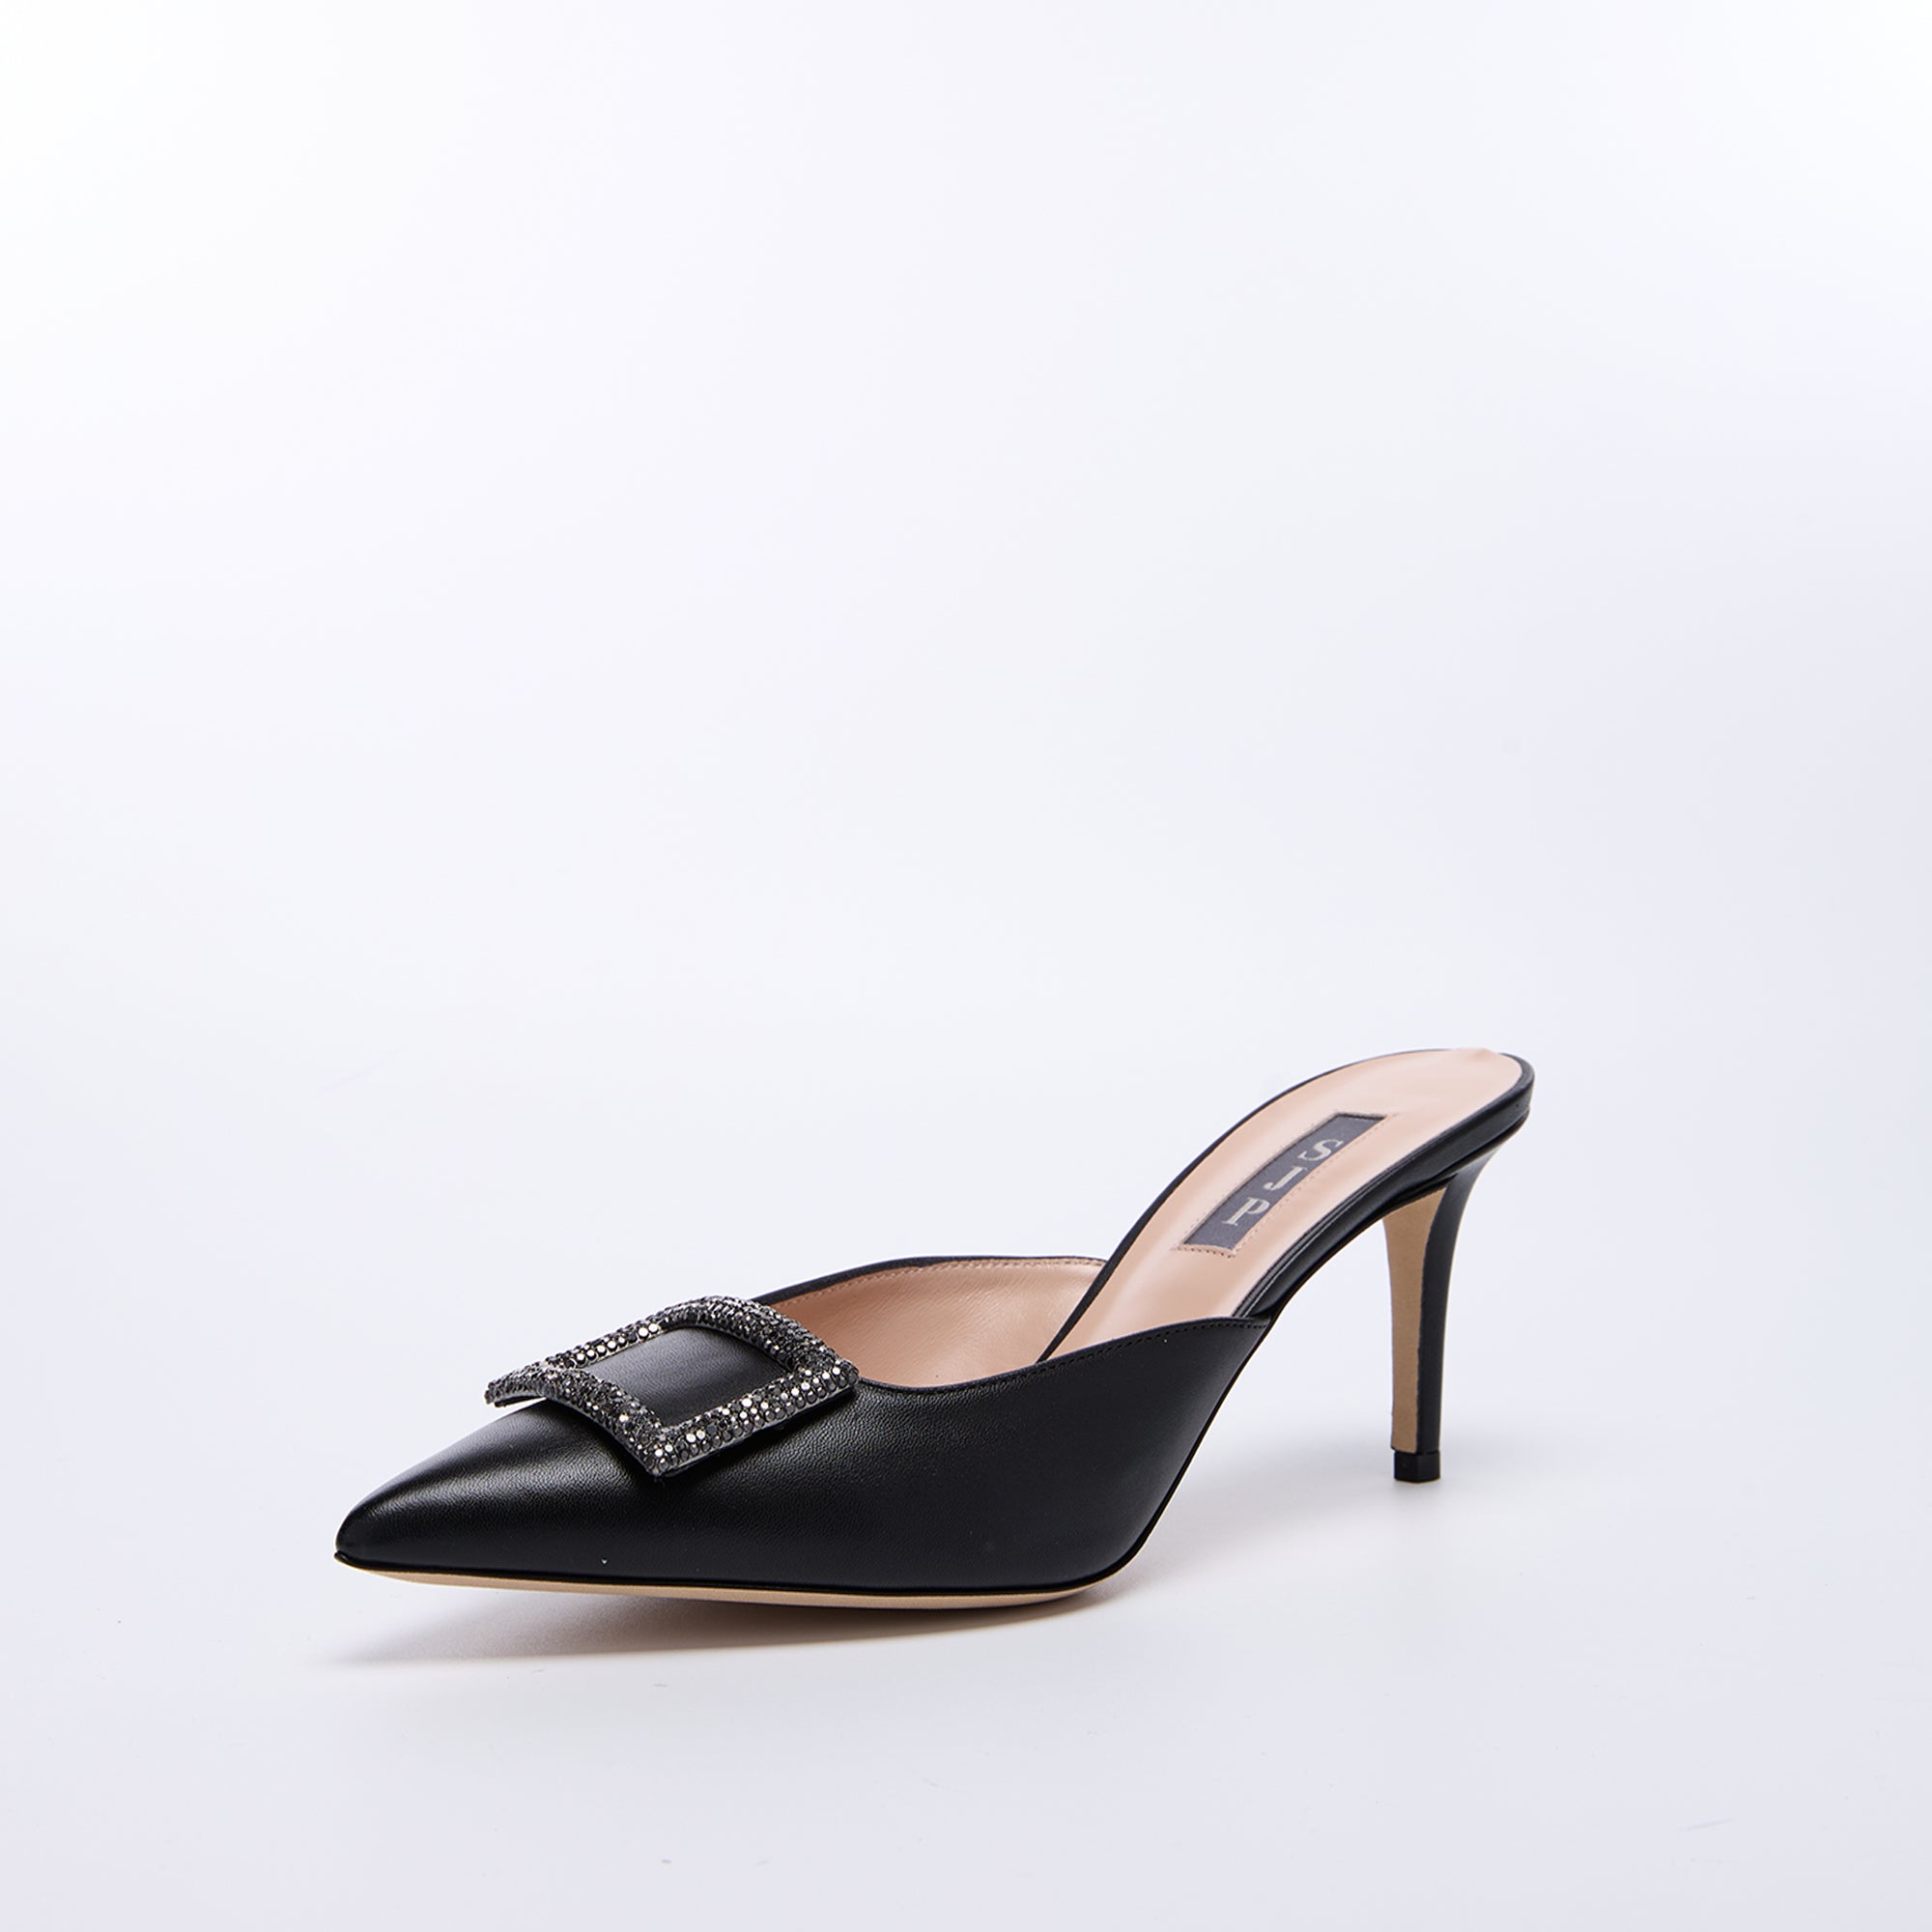 SJP by Sarah Jessica Parker Noble 70mm Black Leather Mules